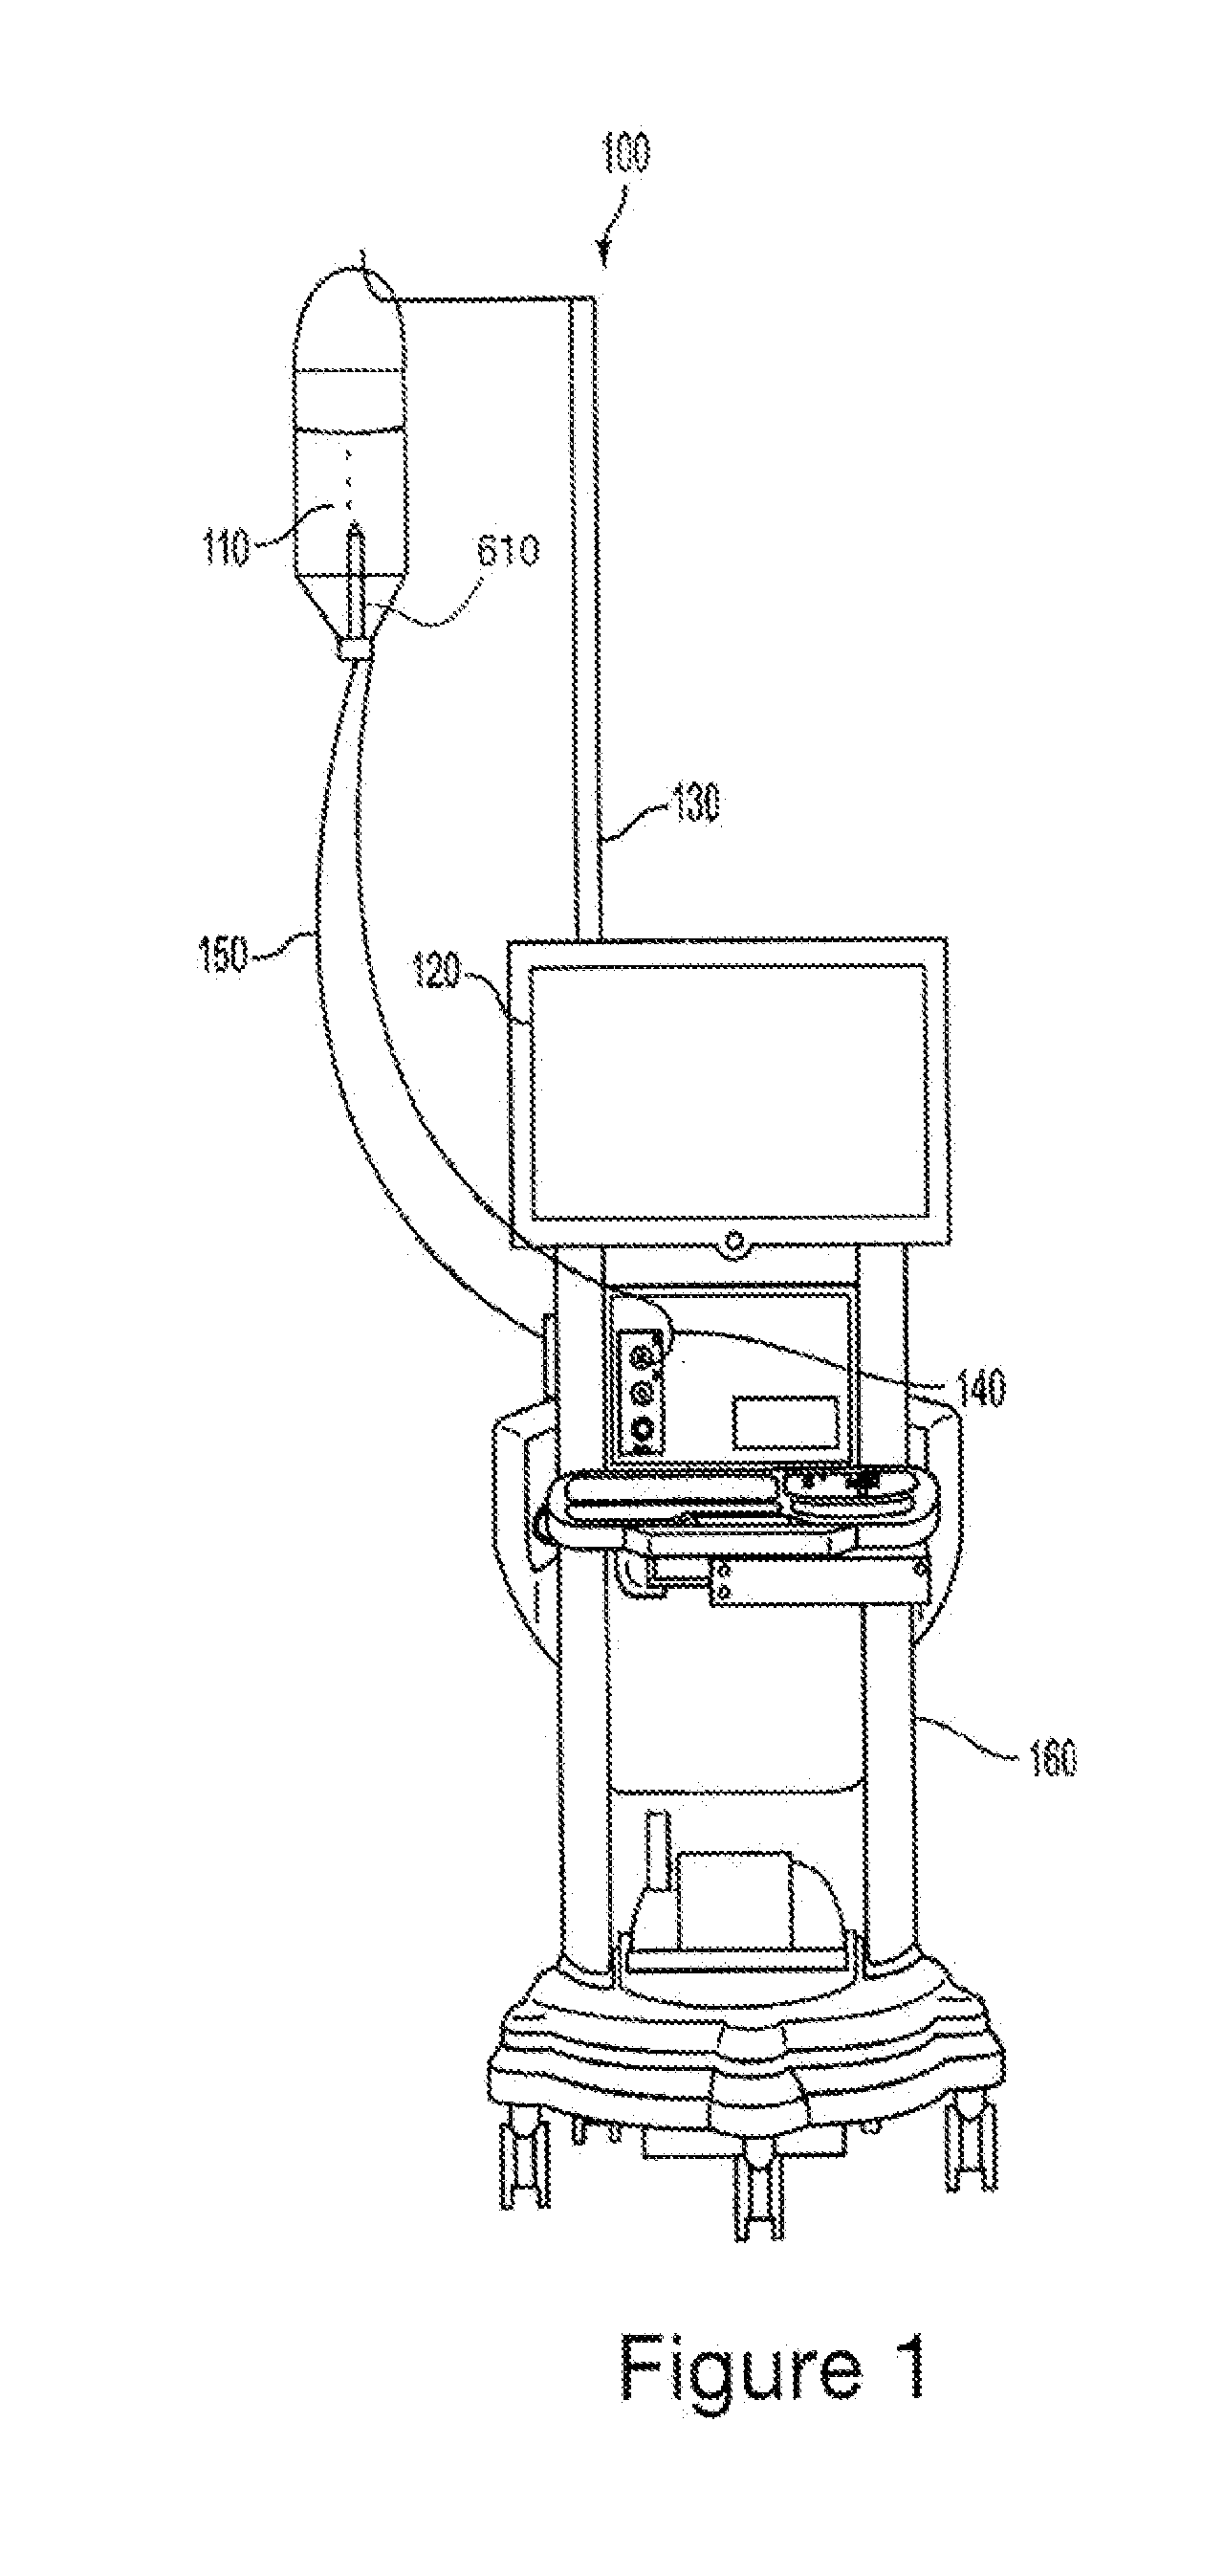 System and method for providing pressurized infusion